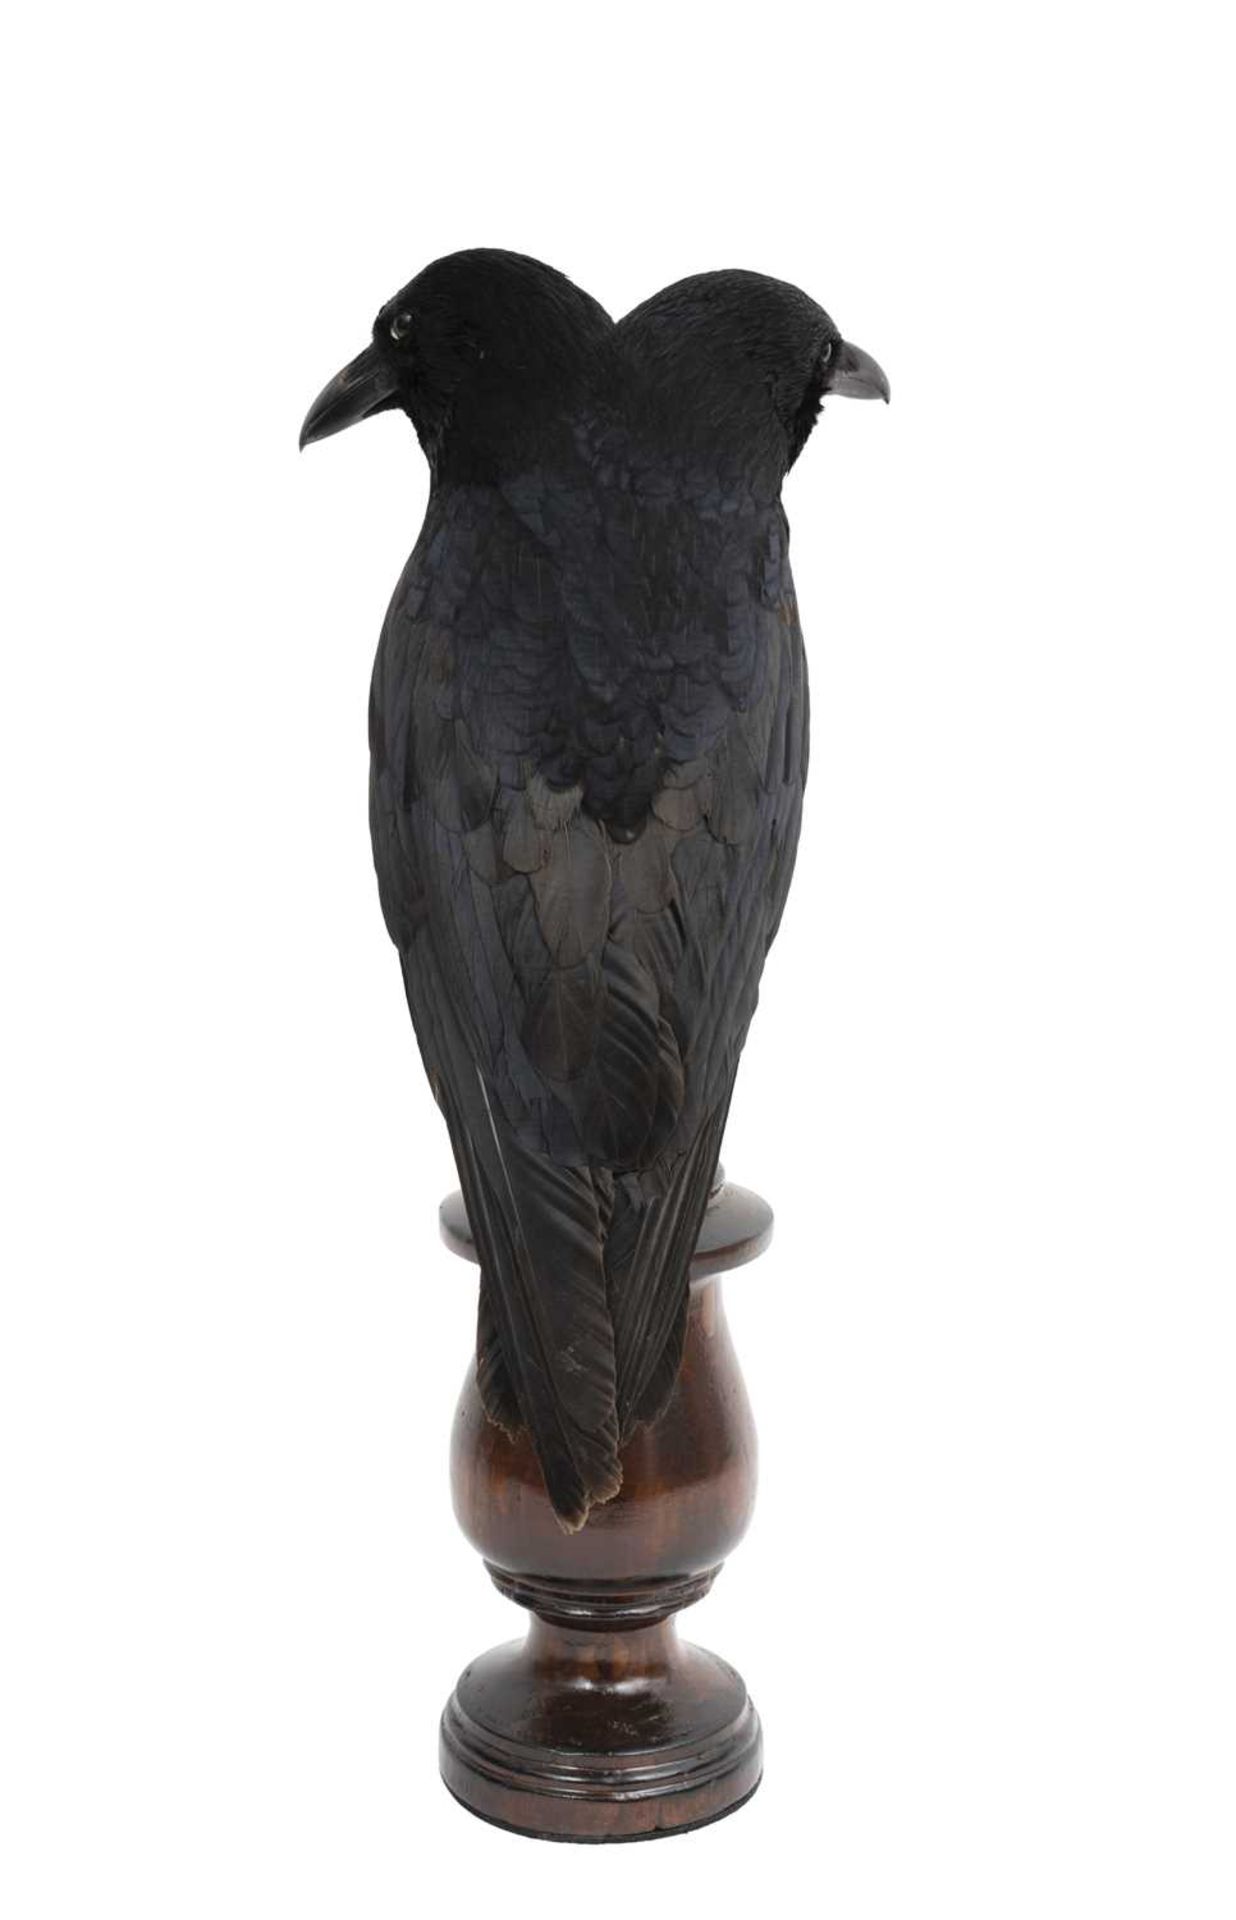 A TAXIDERMY TWO-HEADED CROW - Image 2 of 2